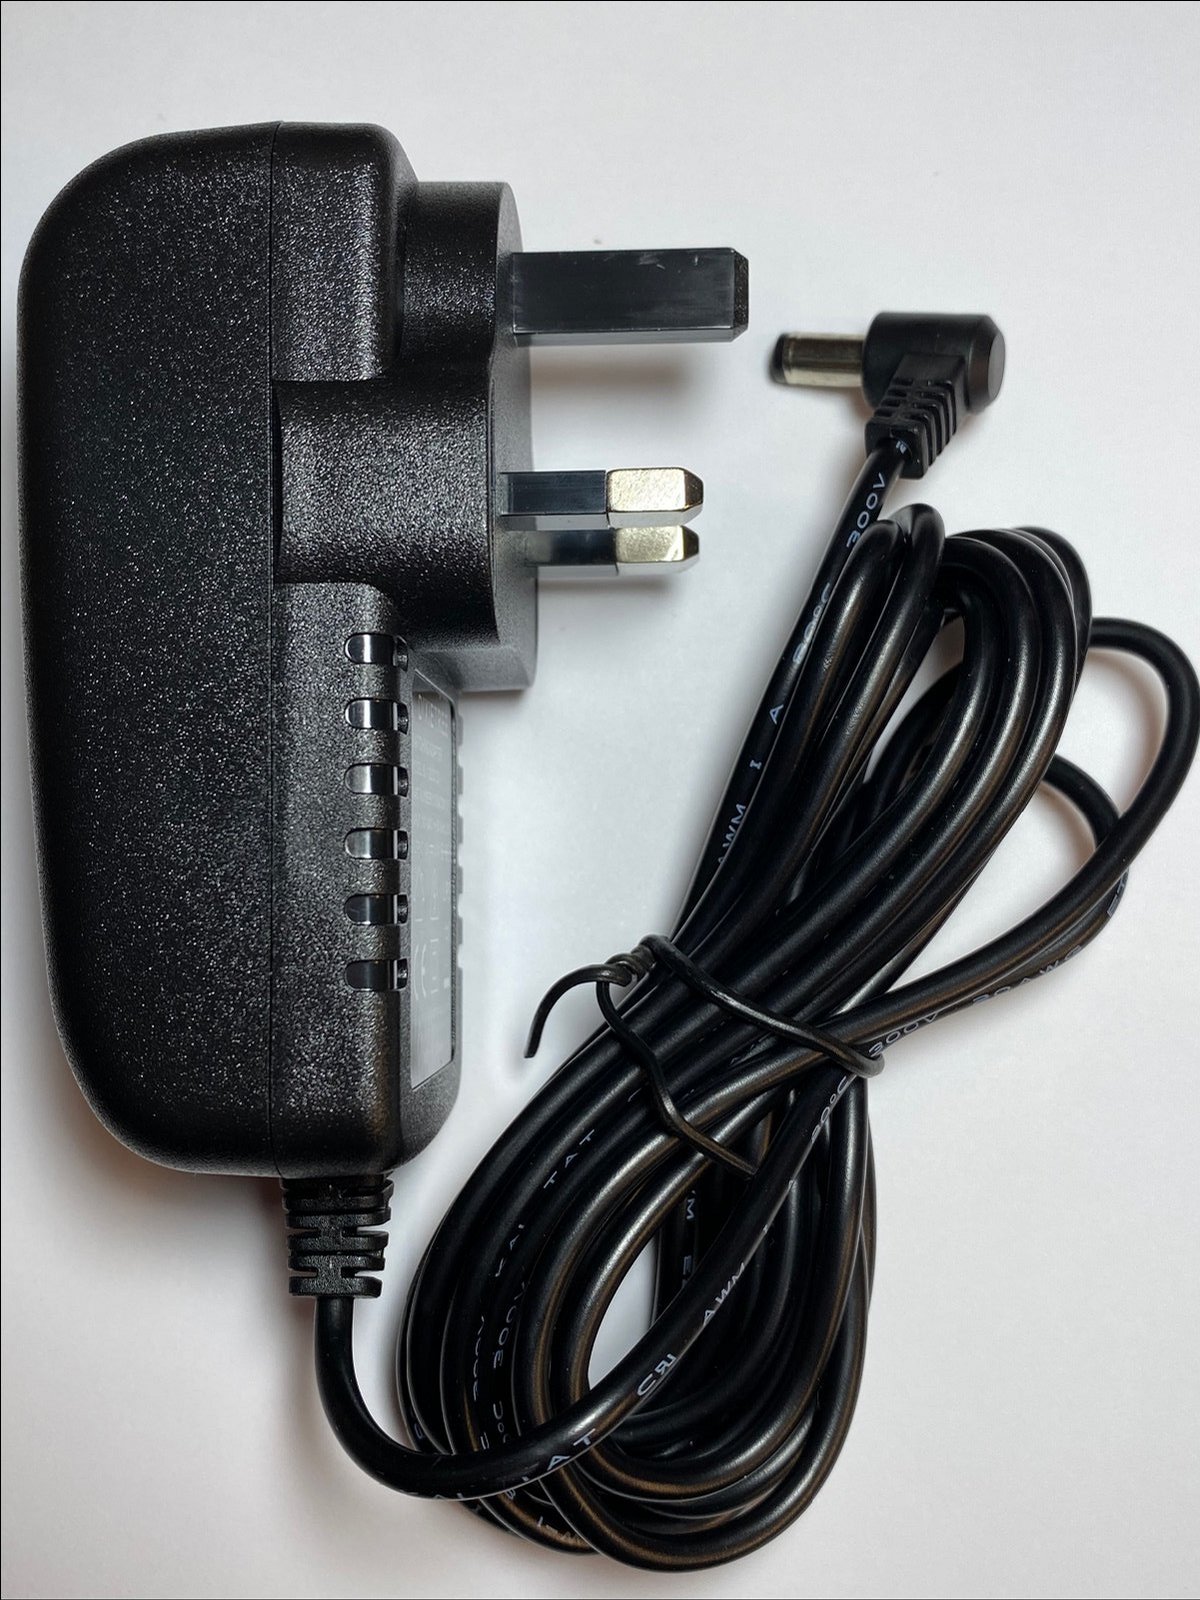 5.5mm 2.5mm 2A 12V SAGEMCOM DTR943205 AC ADAPTER DTR94320S TV RECORDER AC ADAPTOR POWER SUPPLY CHARGER Type: Power Ad